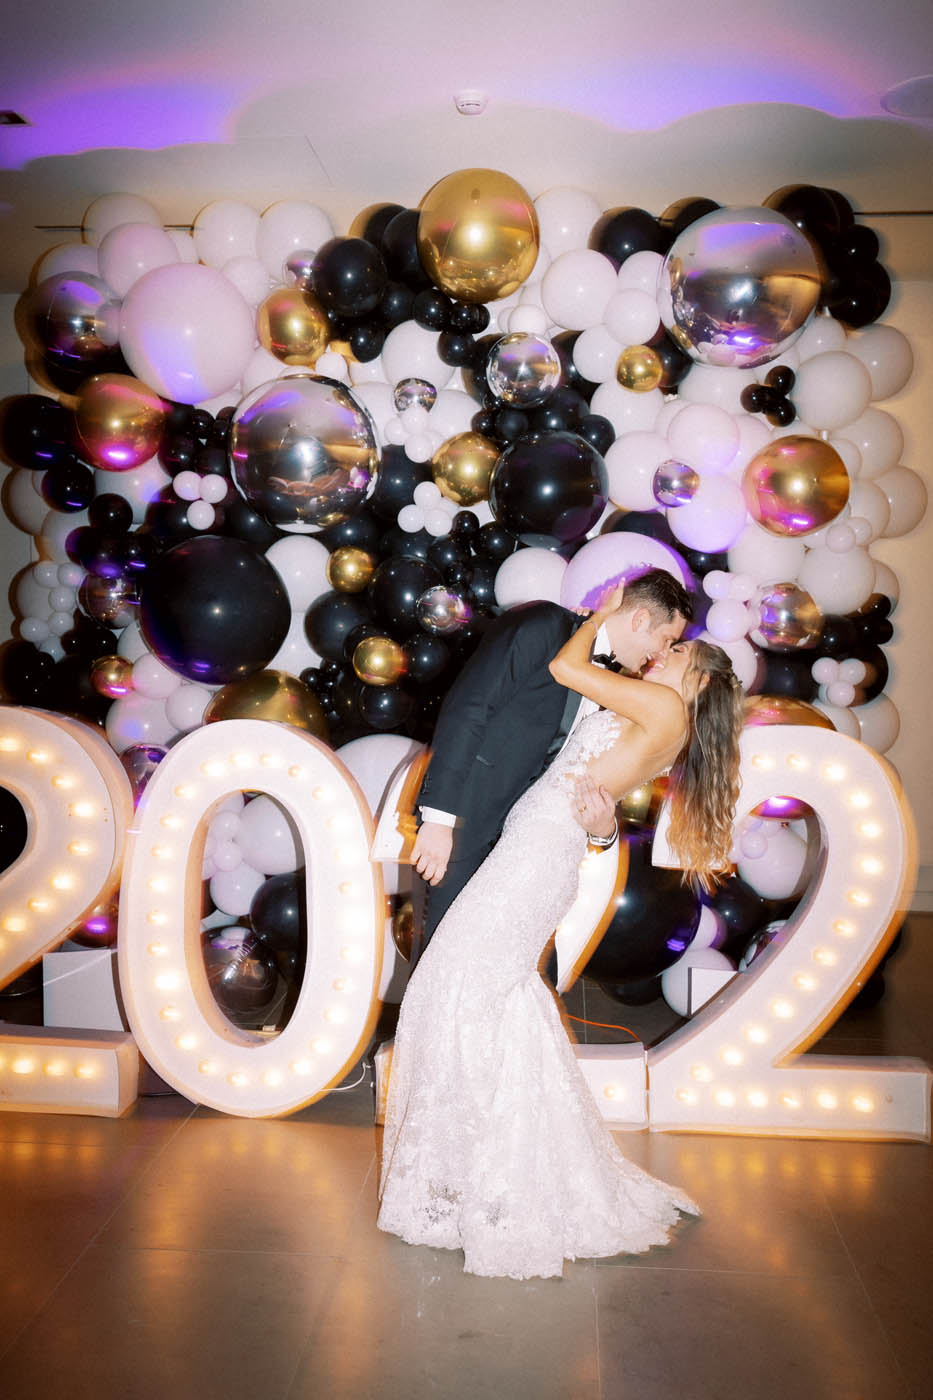 the bride and groom kiss in front of a balloon wall that says 2022